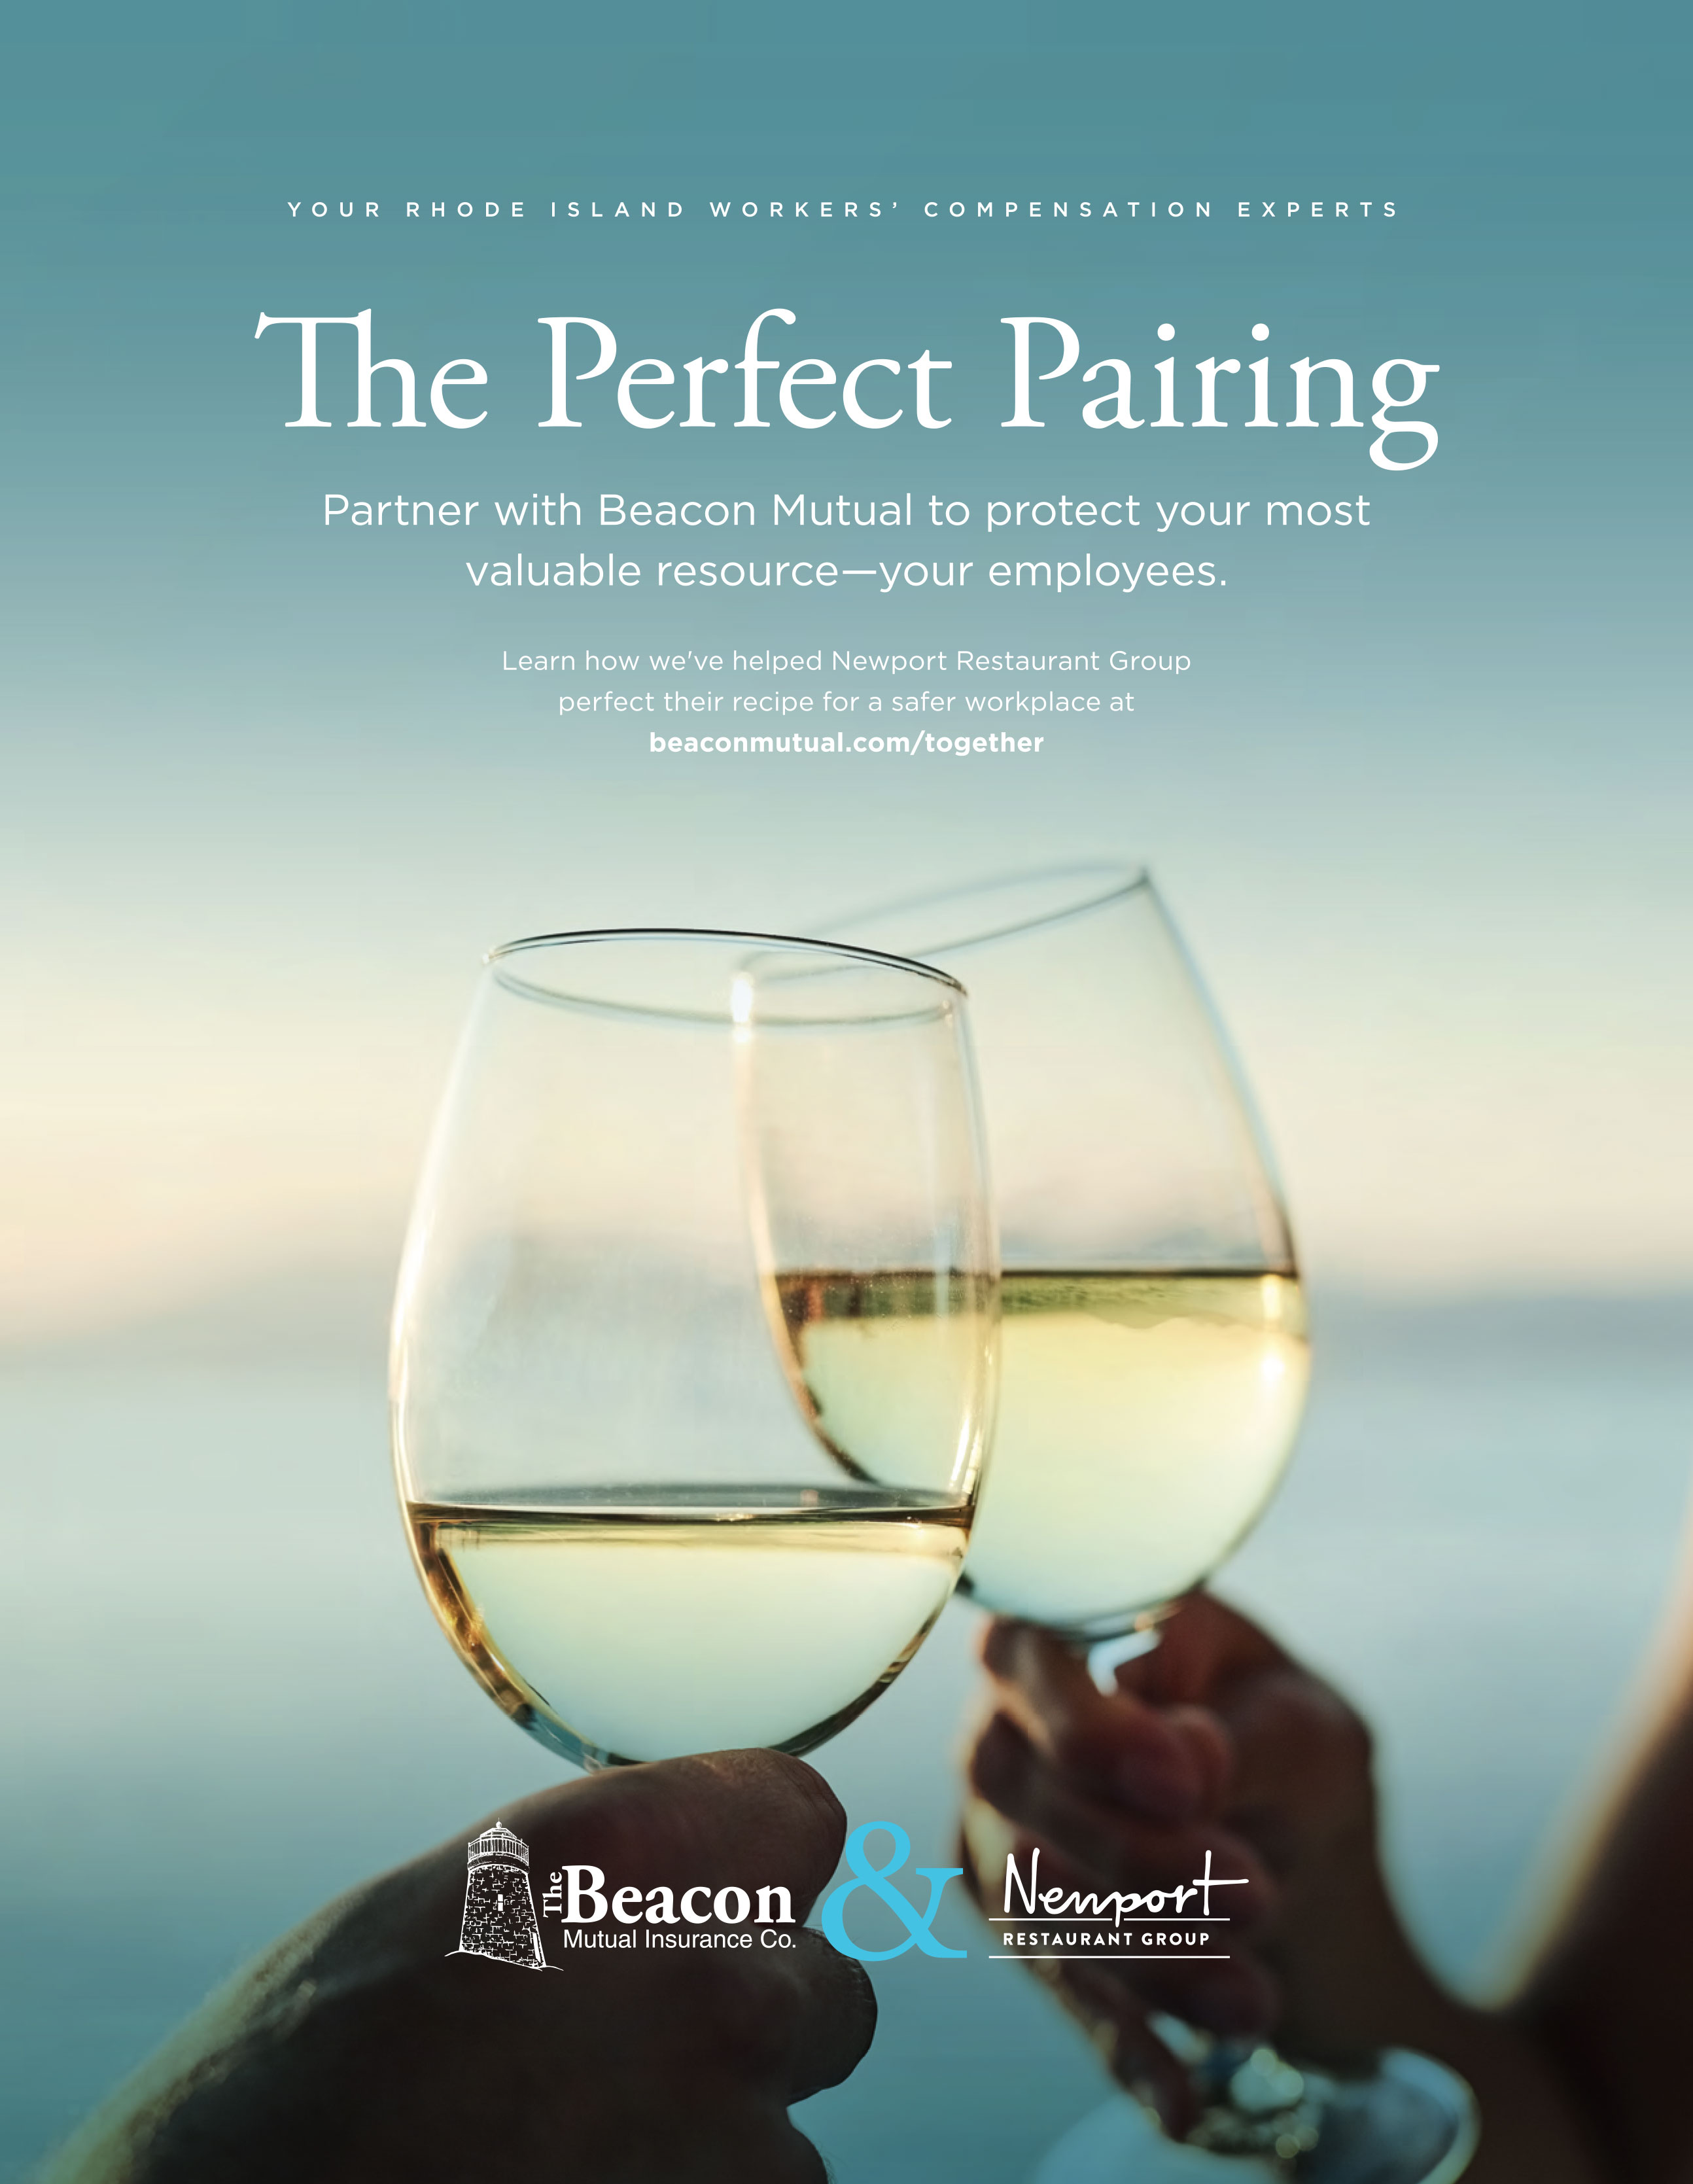 Beacon Mutual advertisement with two wine glasses clinking together